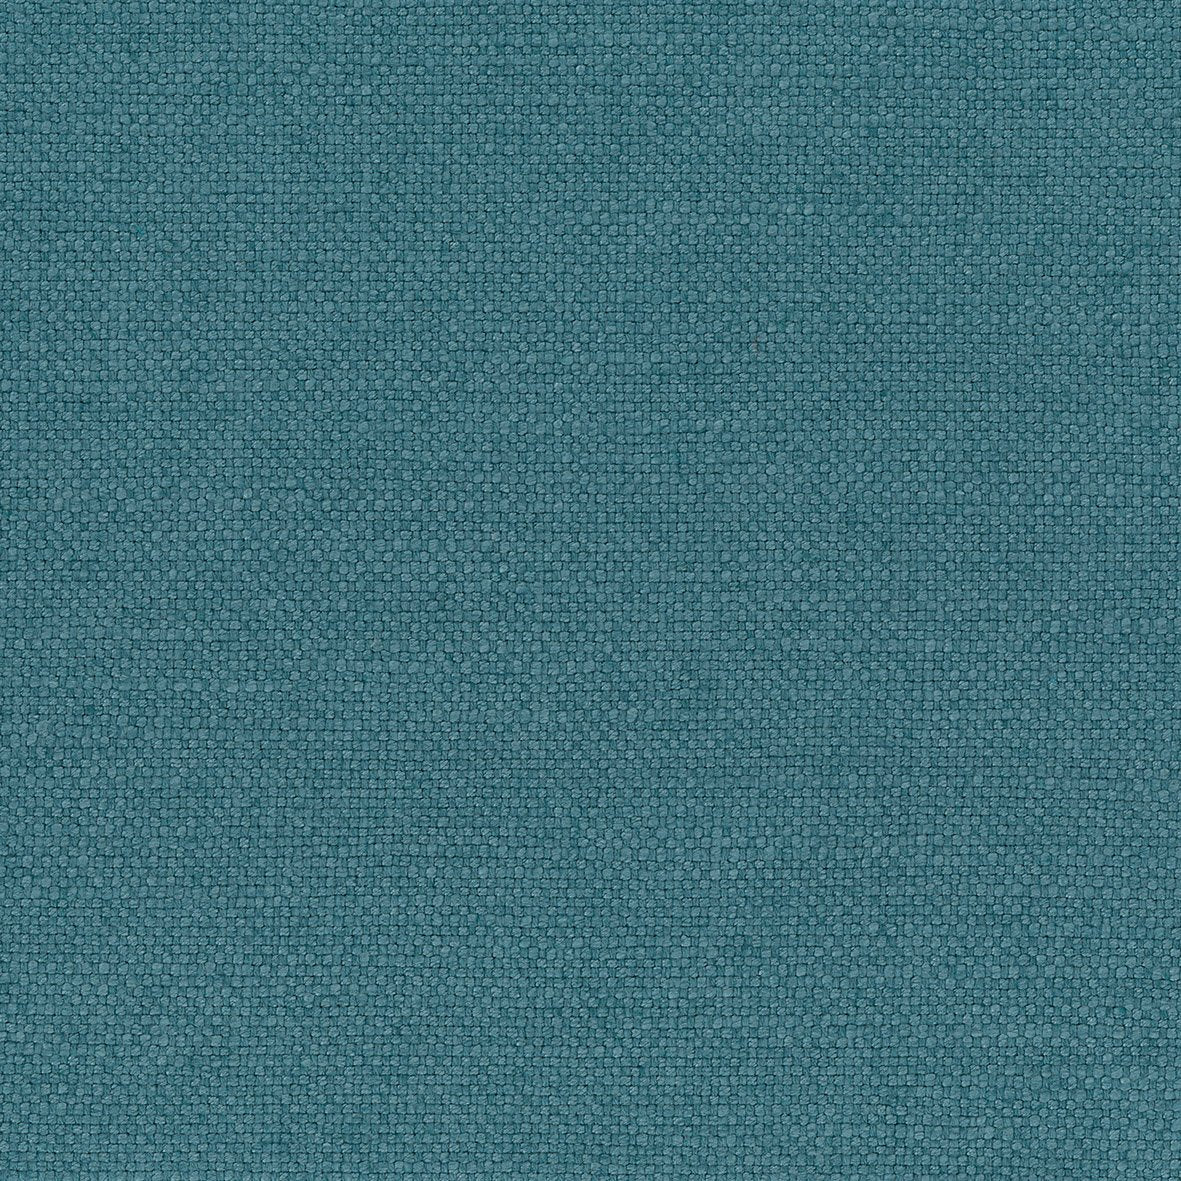 Nina Campbell Fabric - Poquelin Colette Teal NCF4312-09